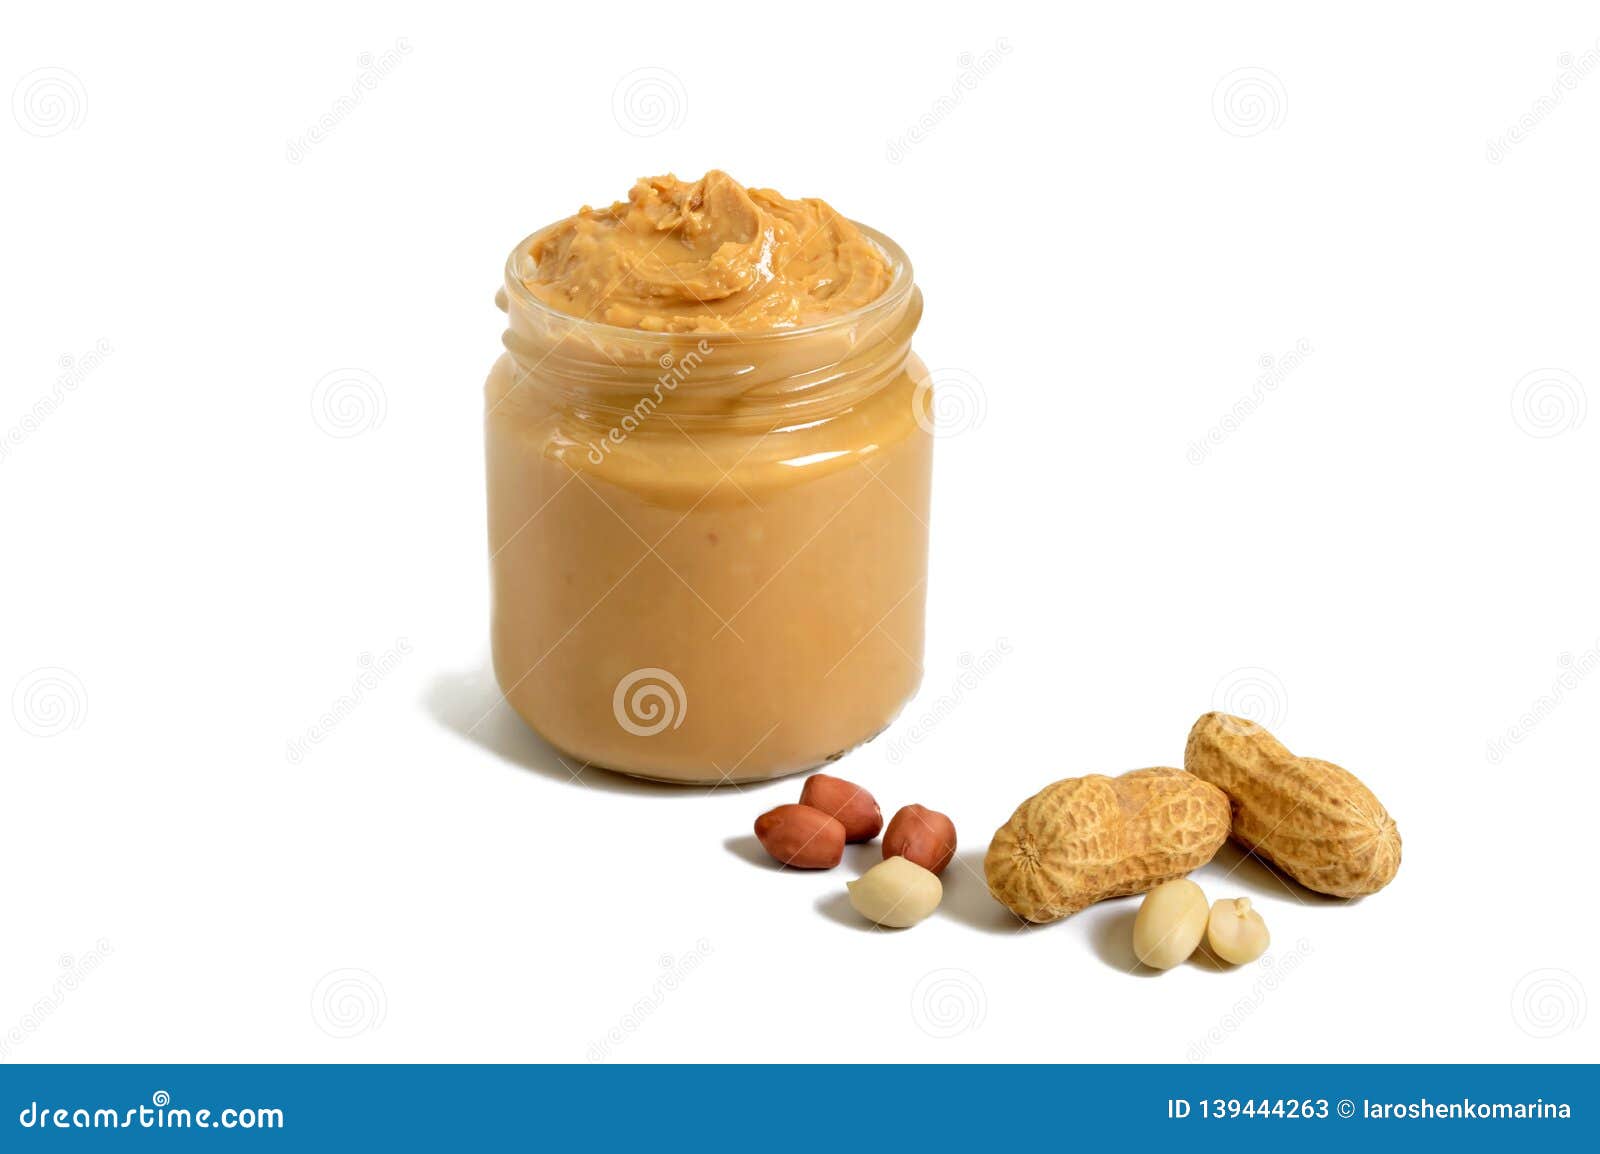 Download 147 Jar Full Creamy Crunchy Peanut Butter Photos Free Royalty Free Stock Photos From Dreamstime Yellowimages Mockups